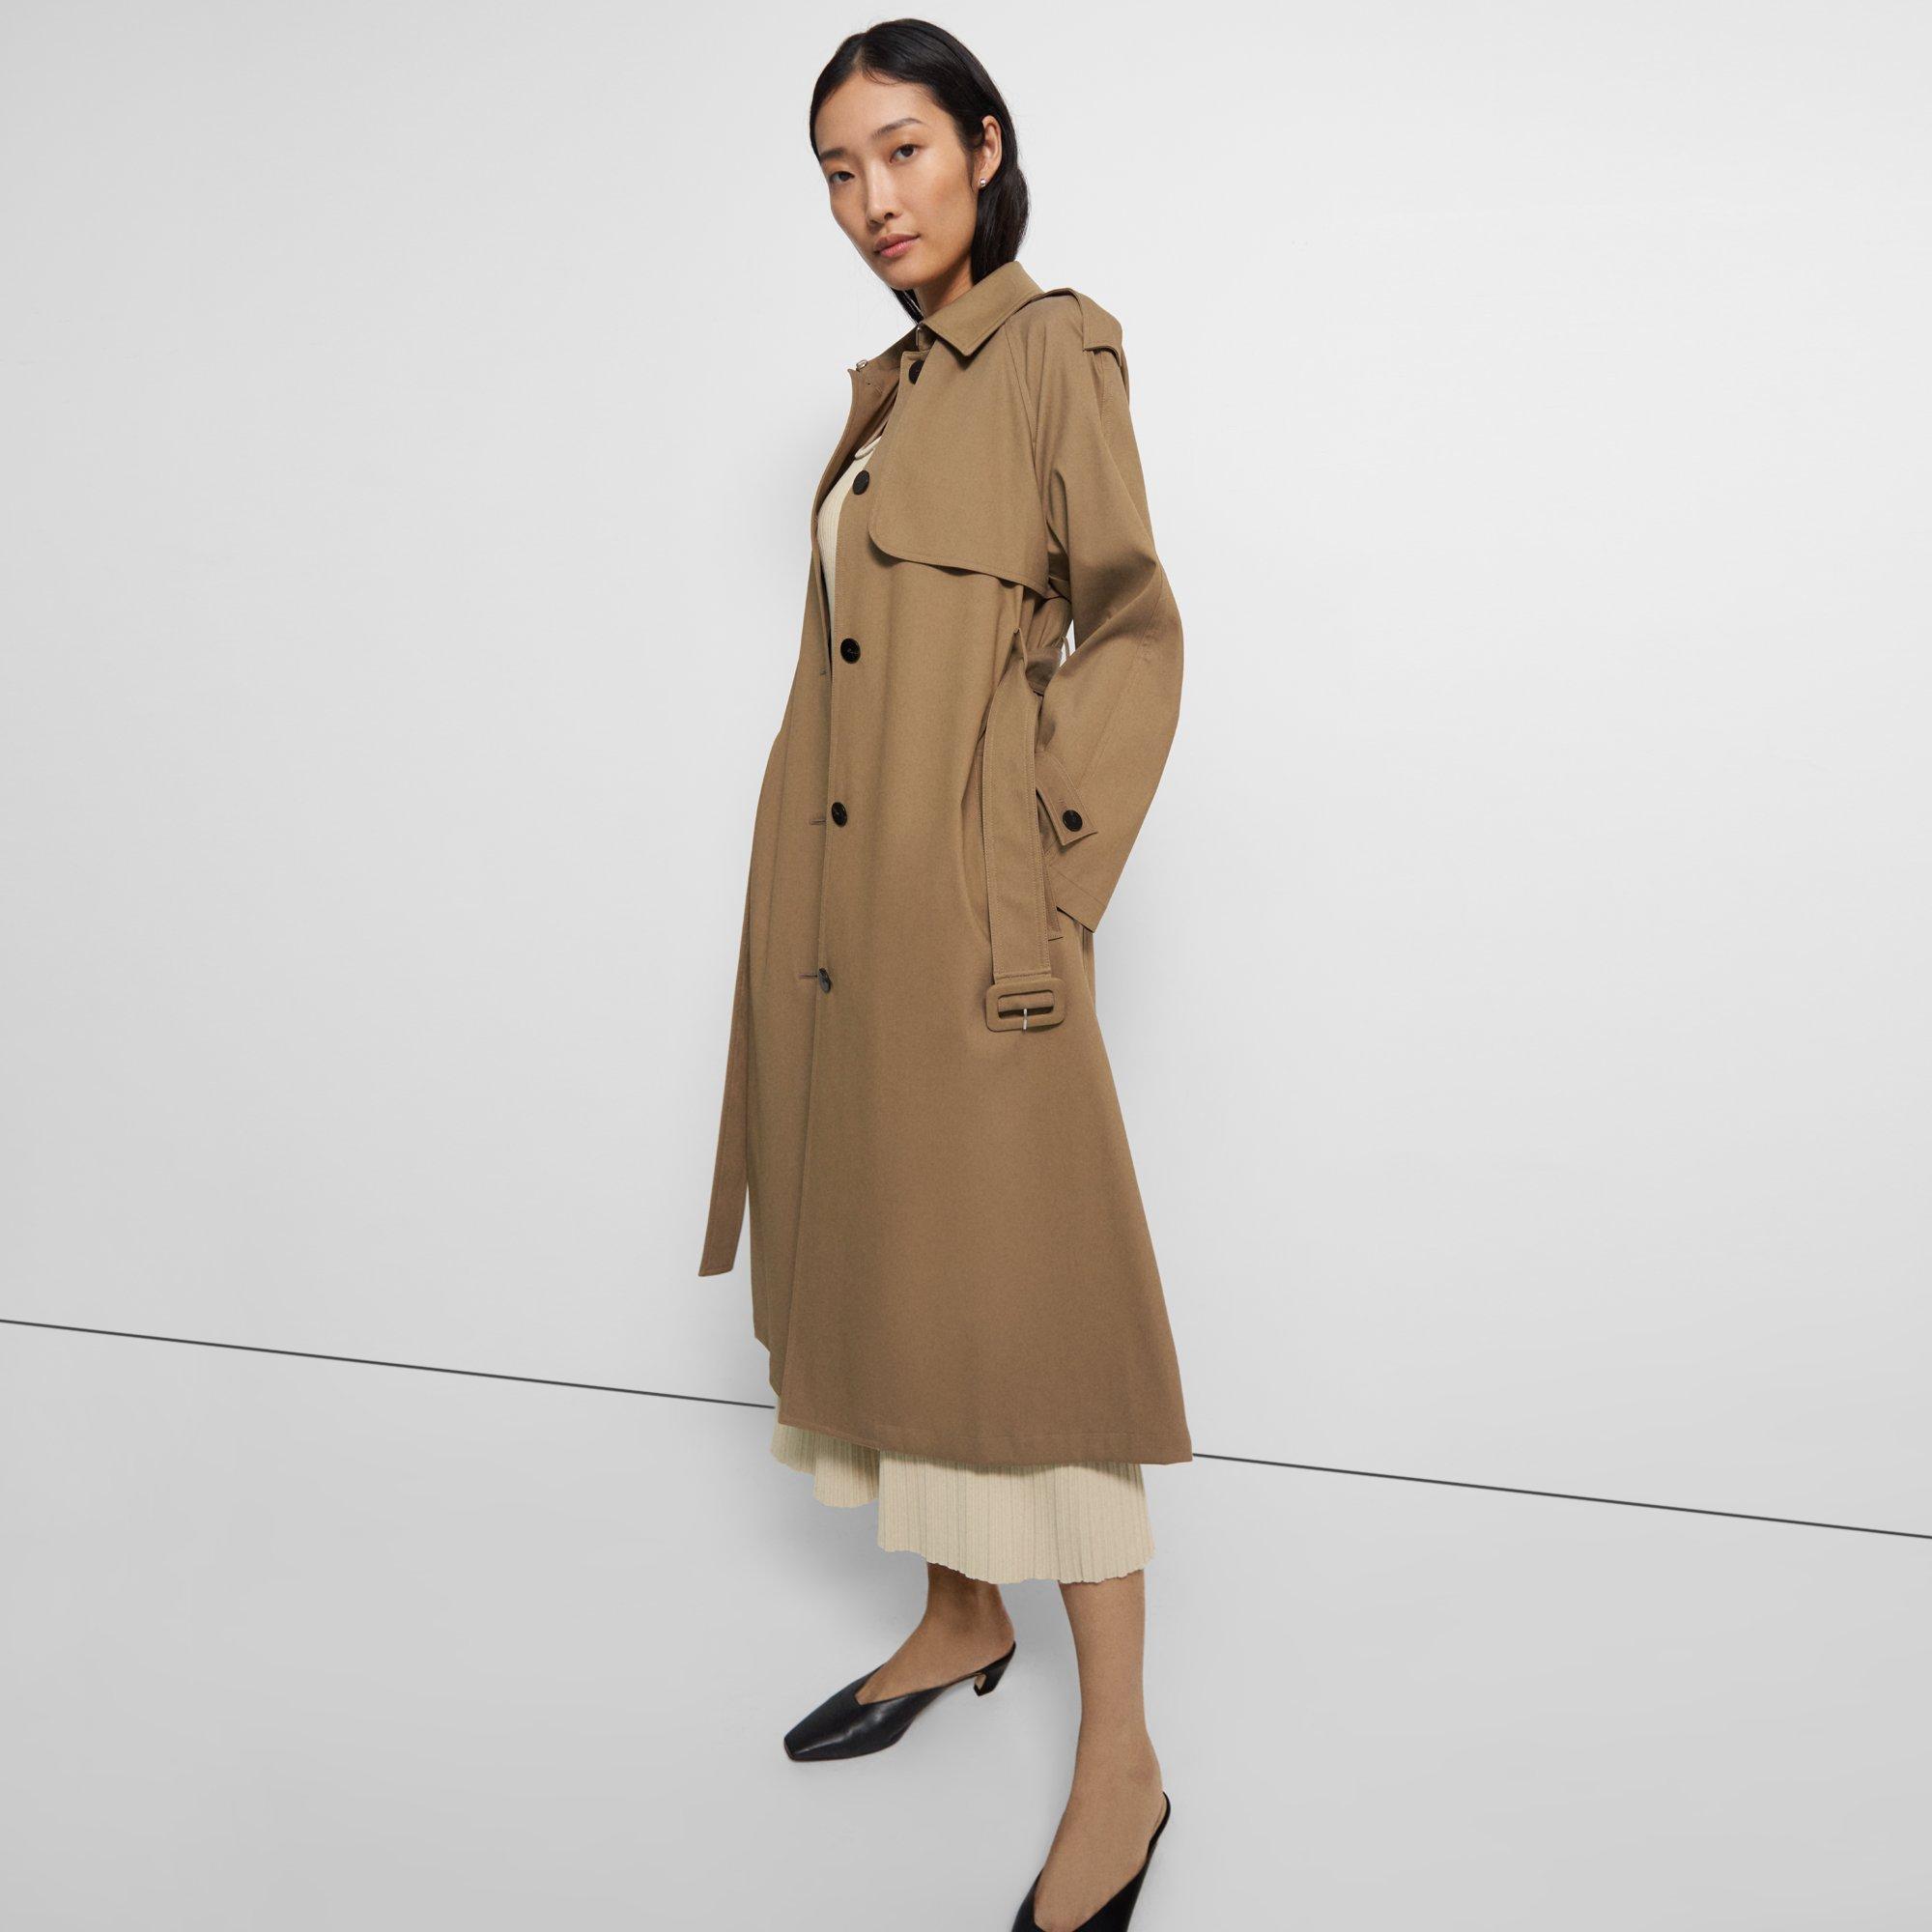 Women's Coats & Outerwear | Theory Official Site